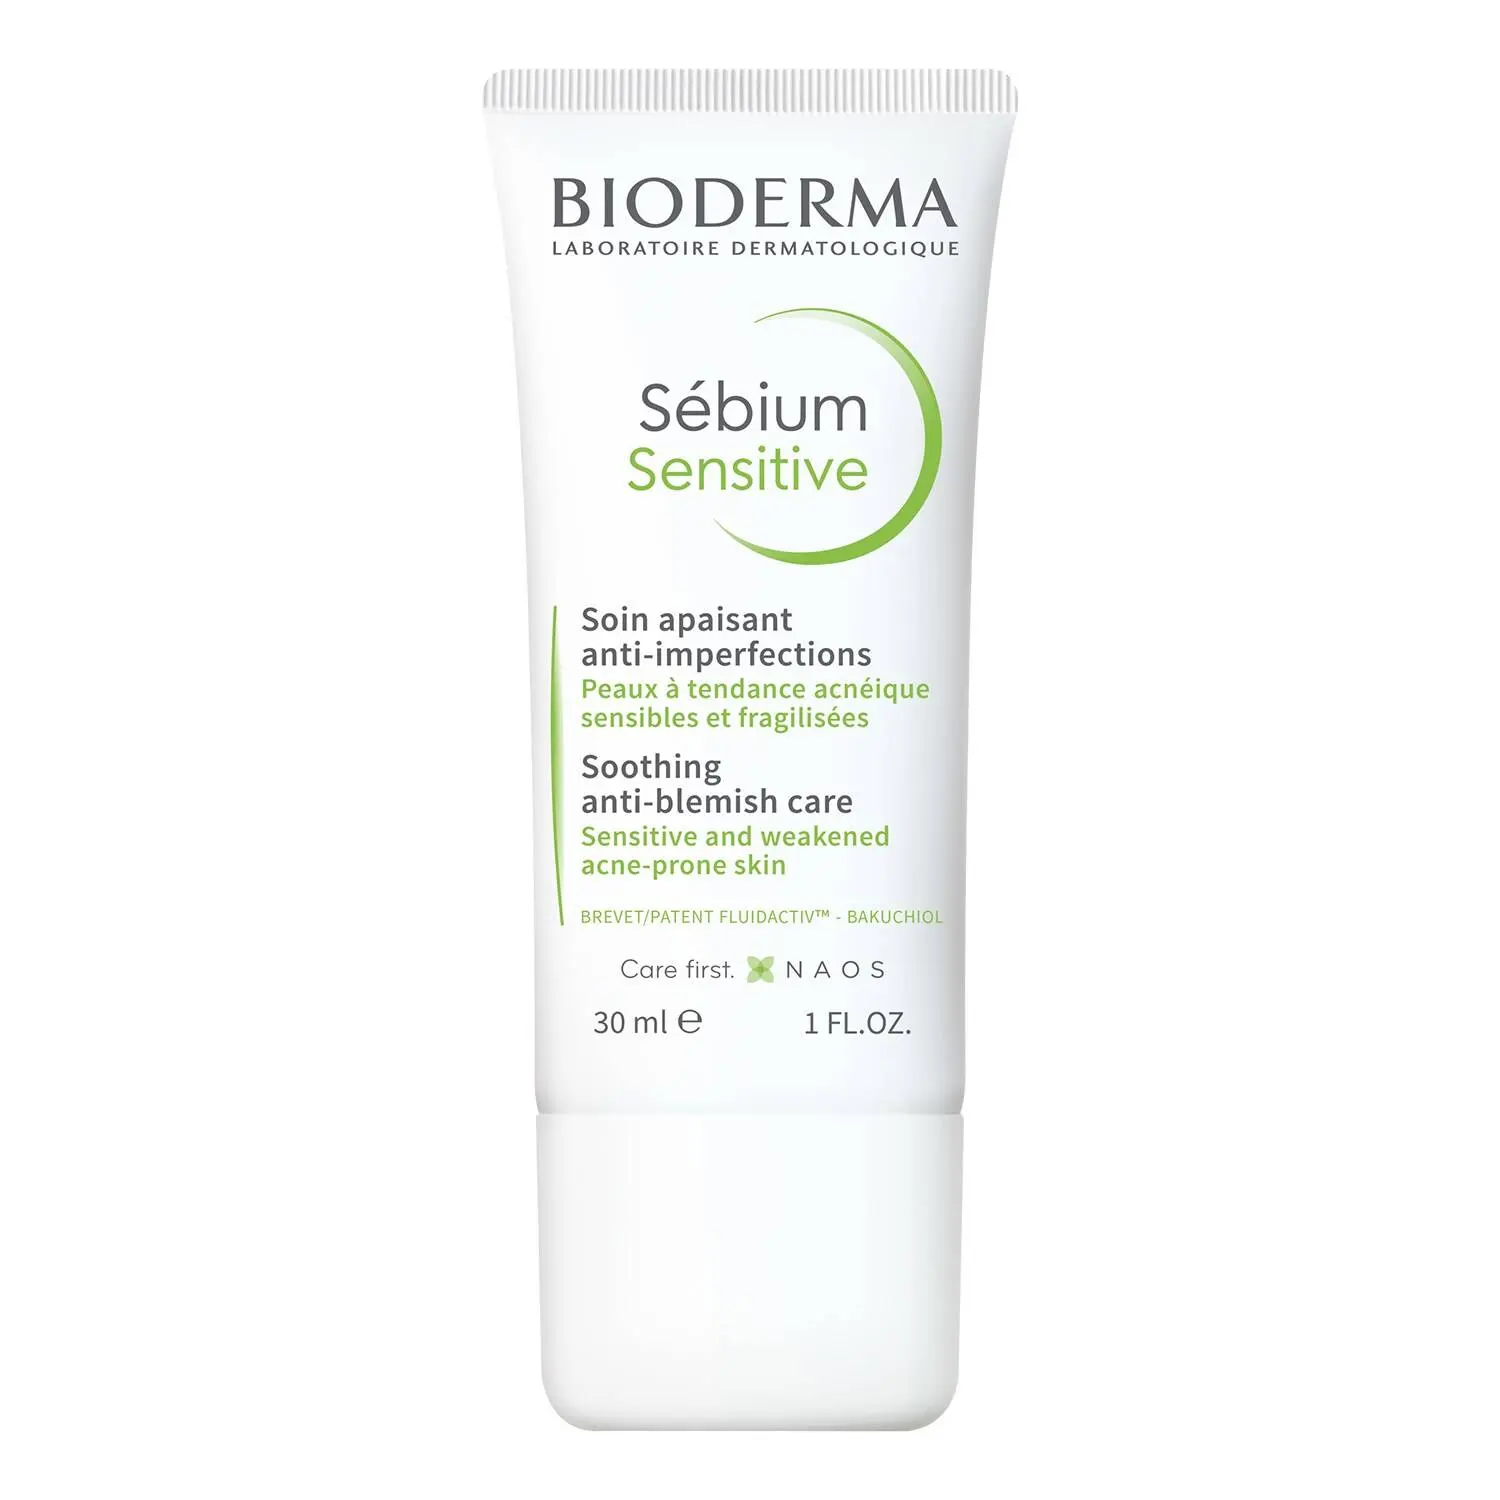 BIODERMA Sensitive Soothing Anti-Blemish Care 30ml Discounts and Cashback